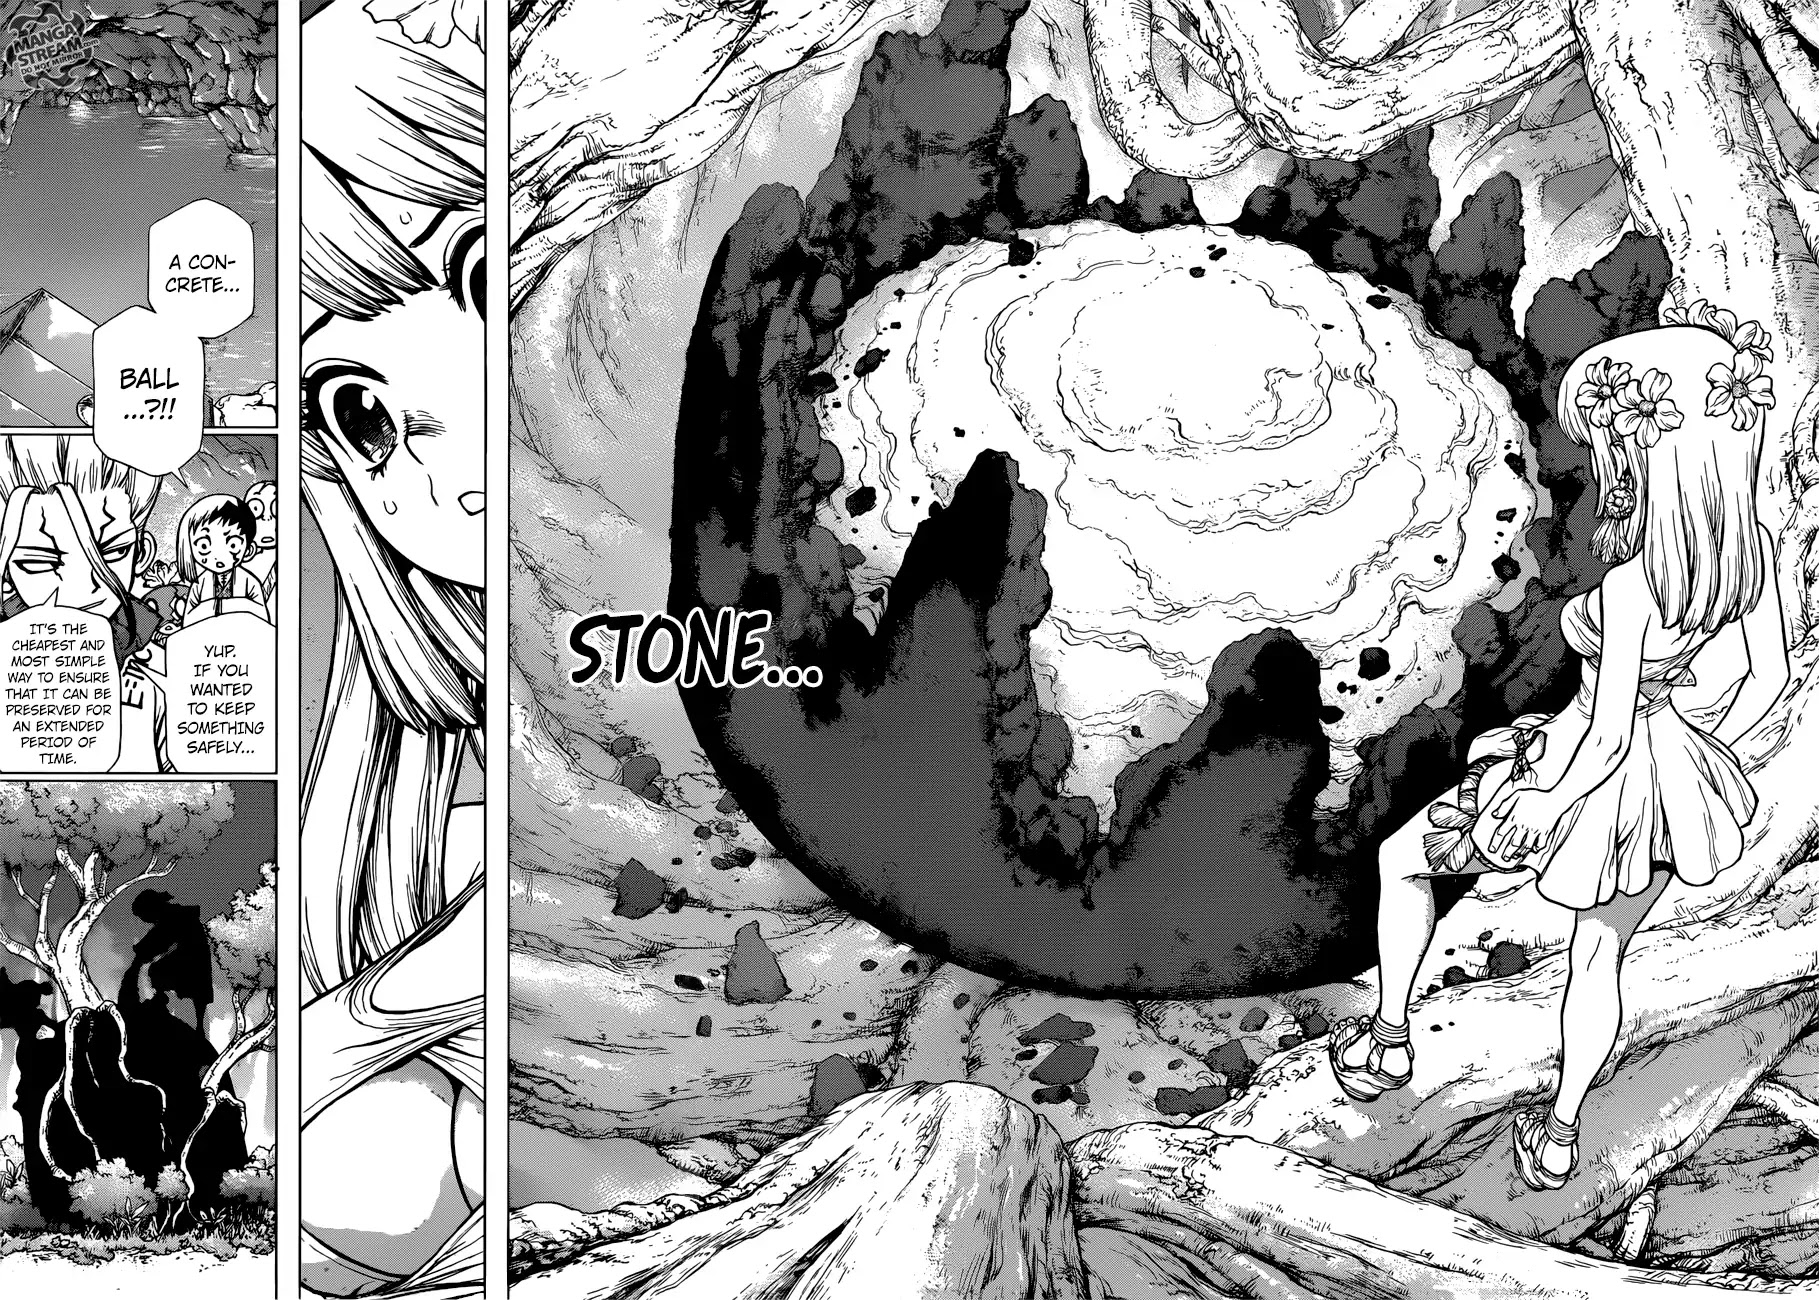 Dr.Stone, Chapter 114 As Science Silently Bores through Stone image 05